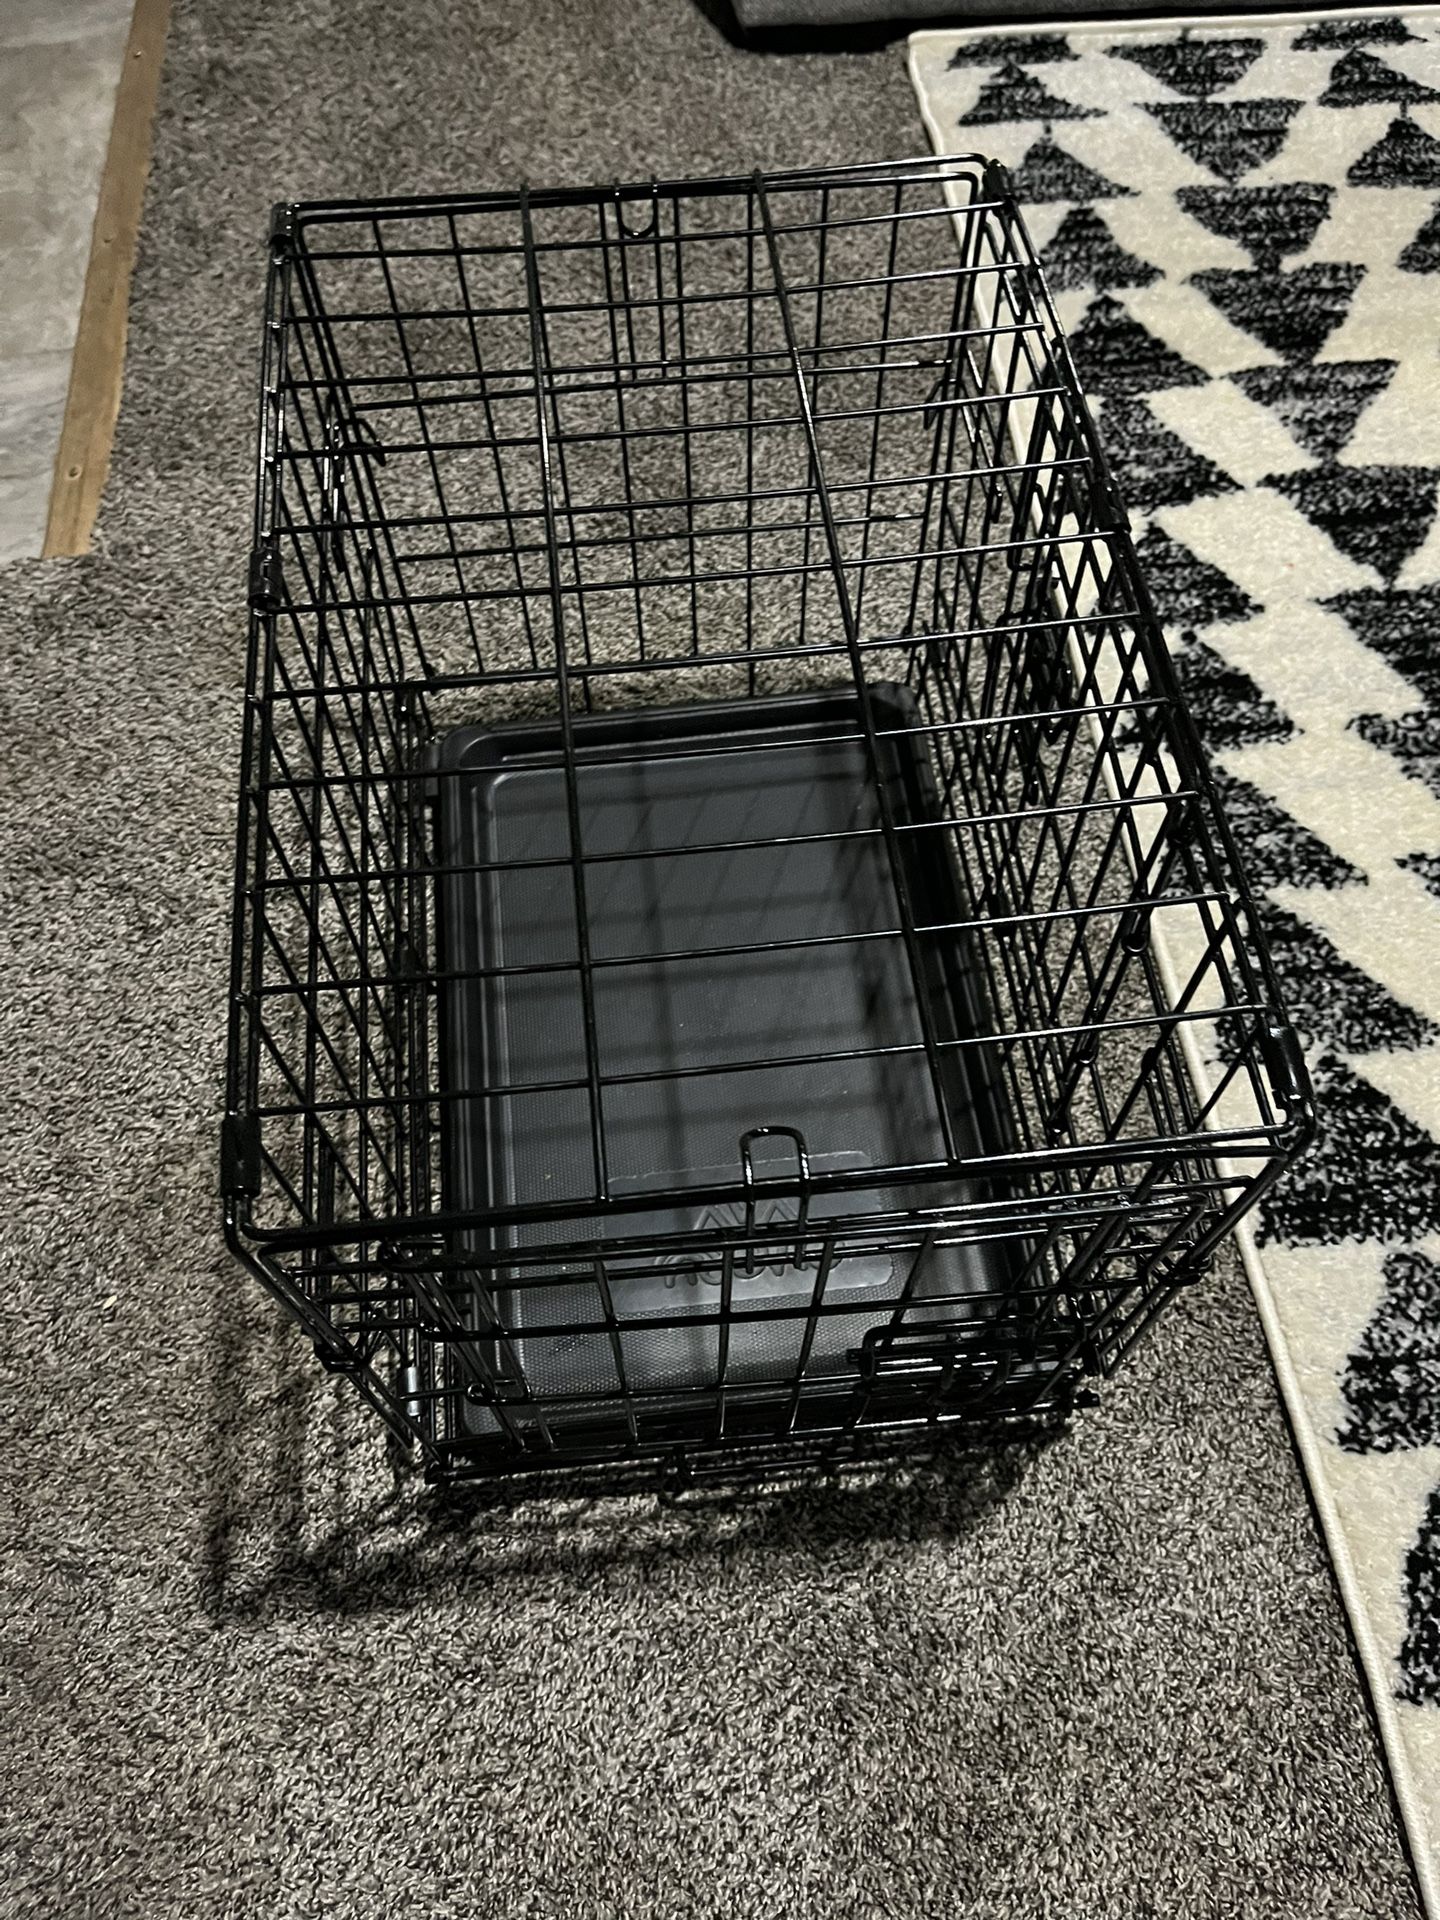 Small Dog crate